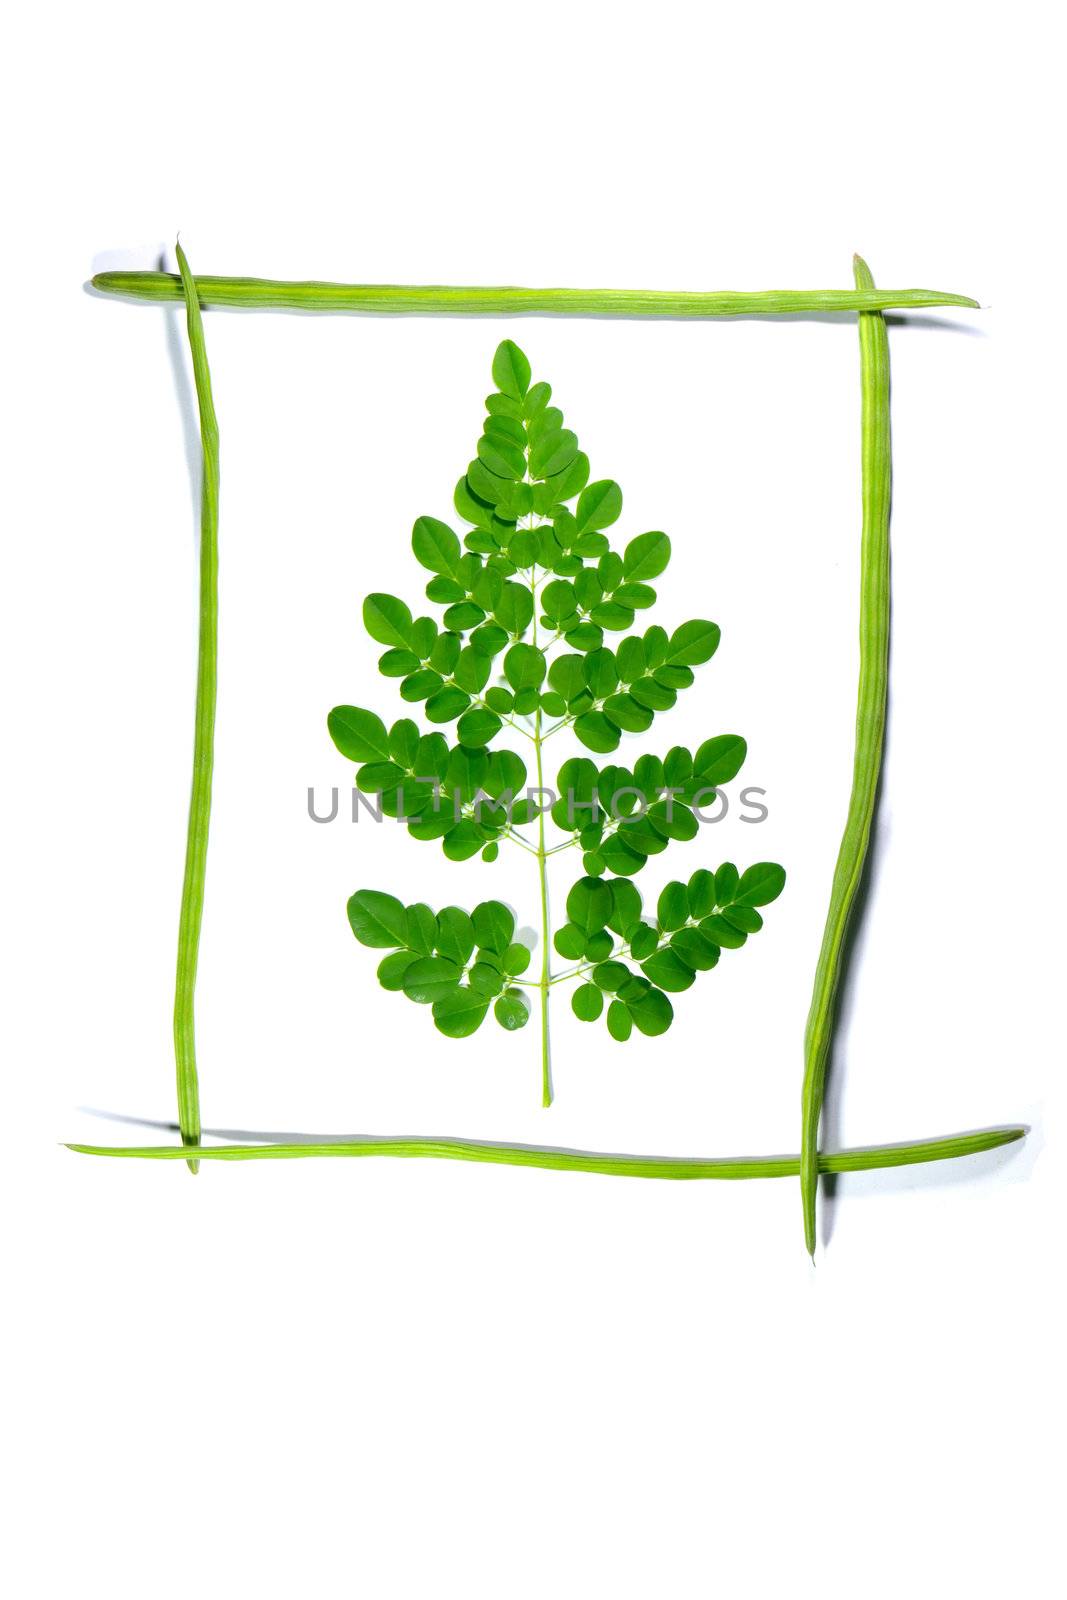 frame drumsticks of moringa oleifera with a branch in it on white background,
